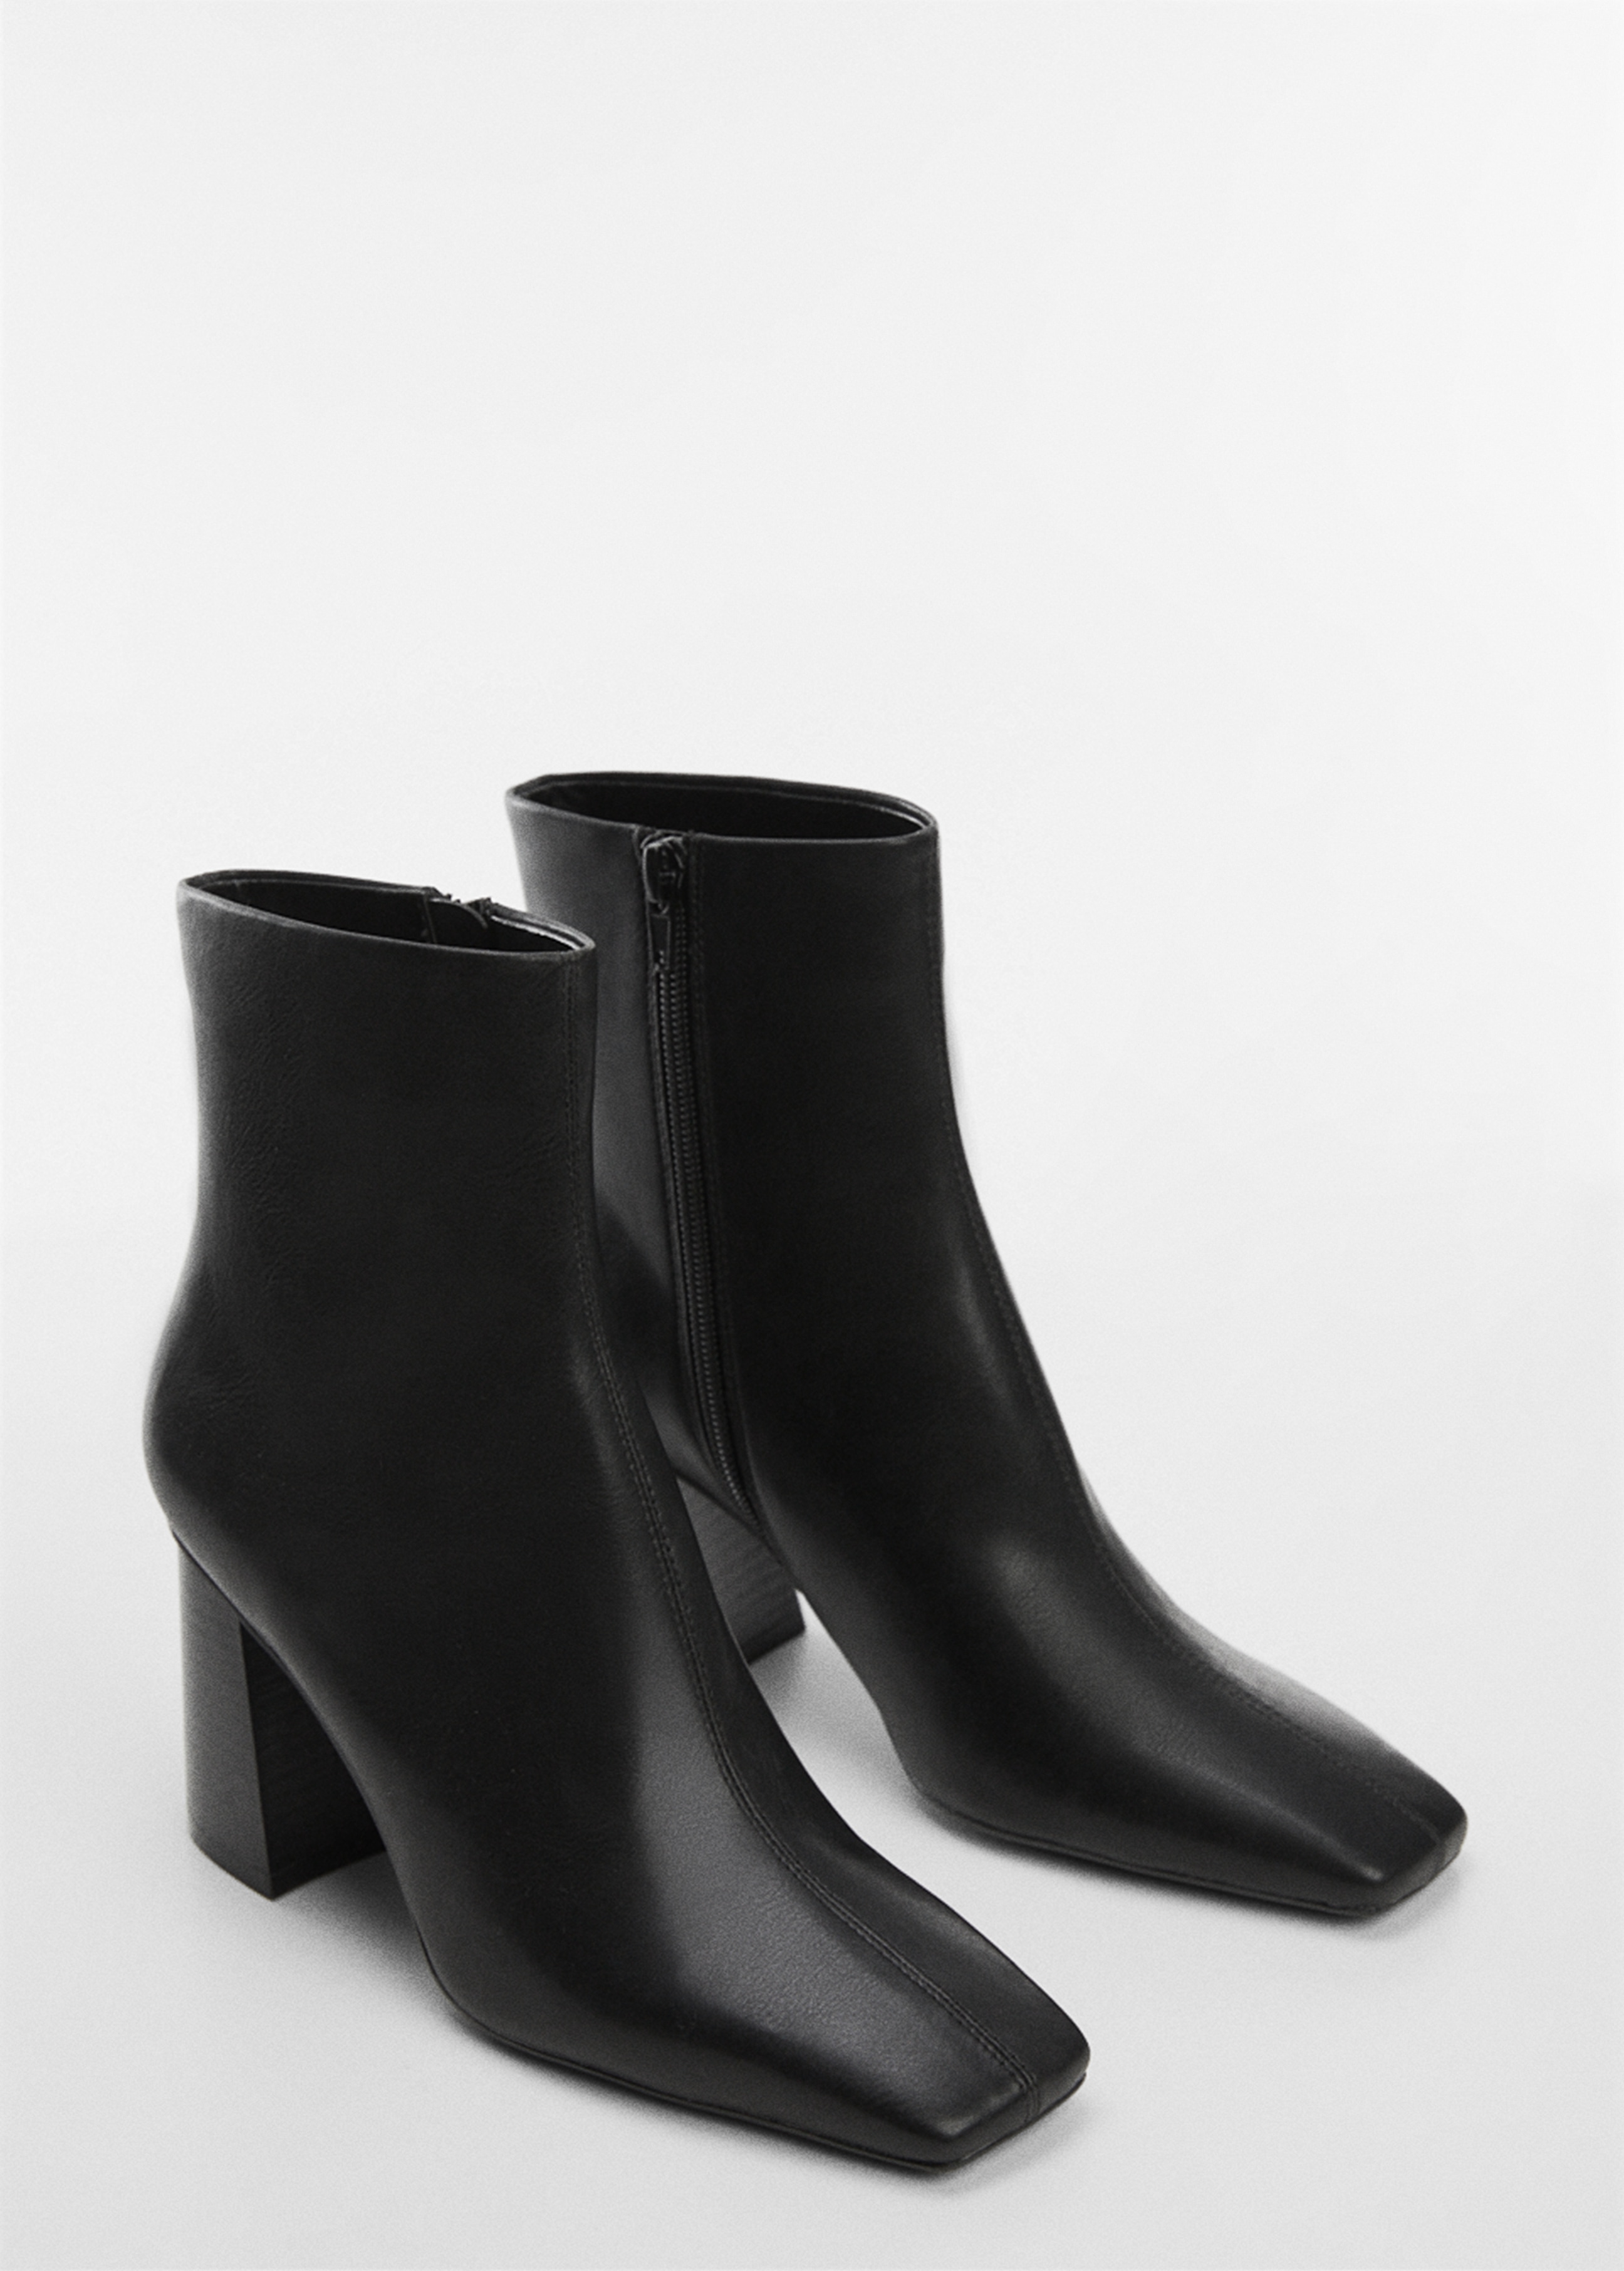 Ankle boots with square toe heel